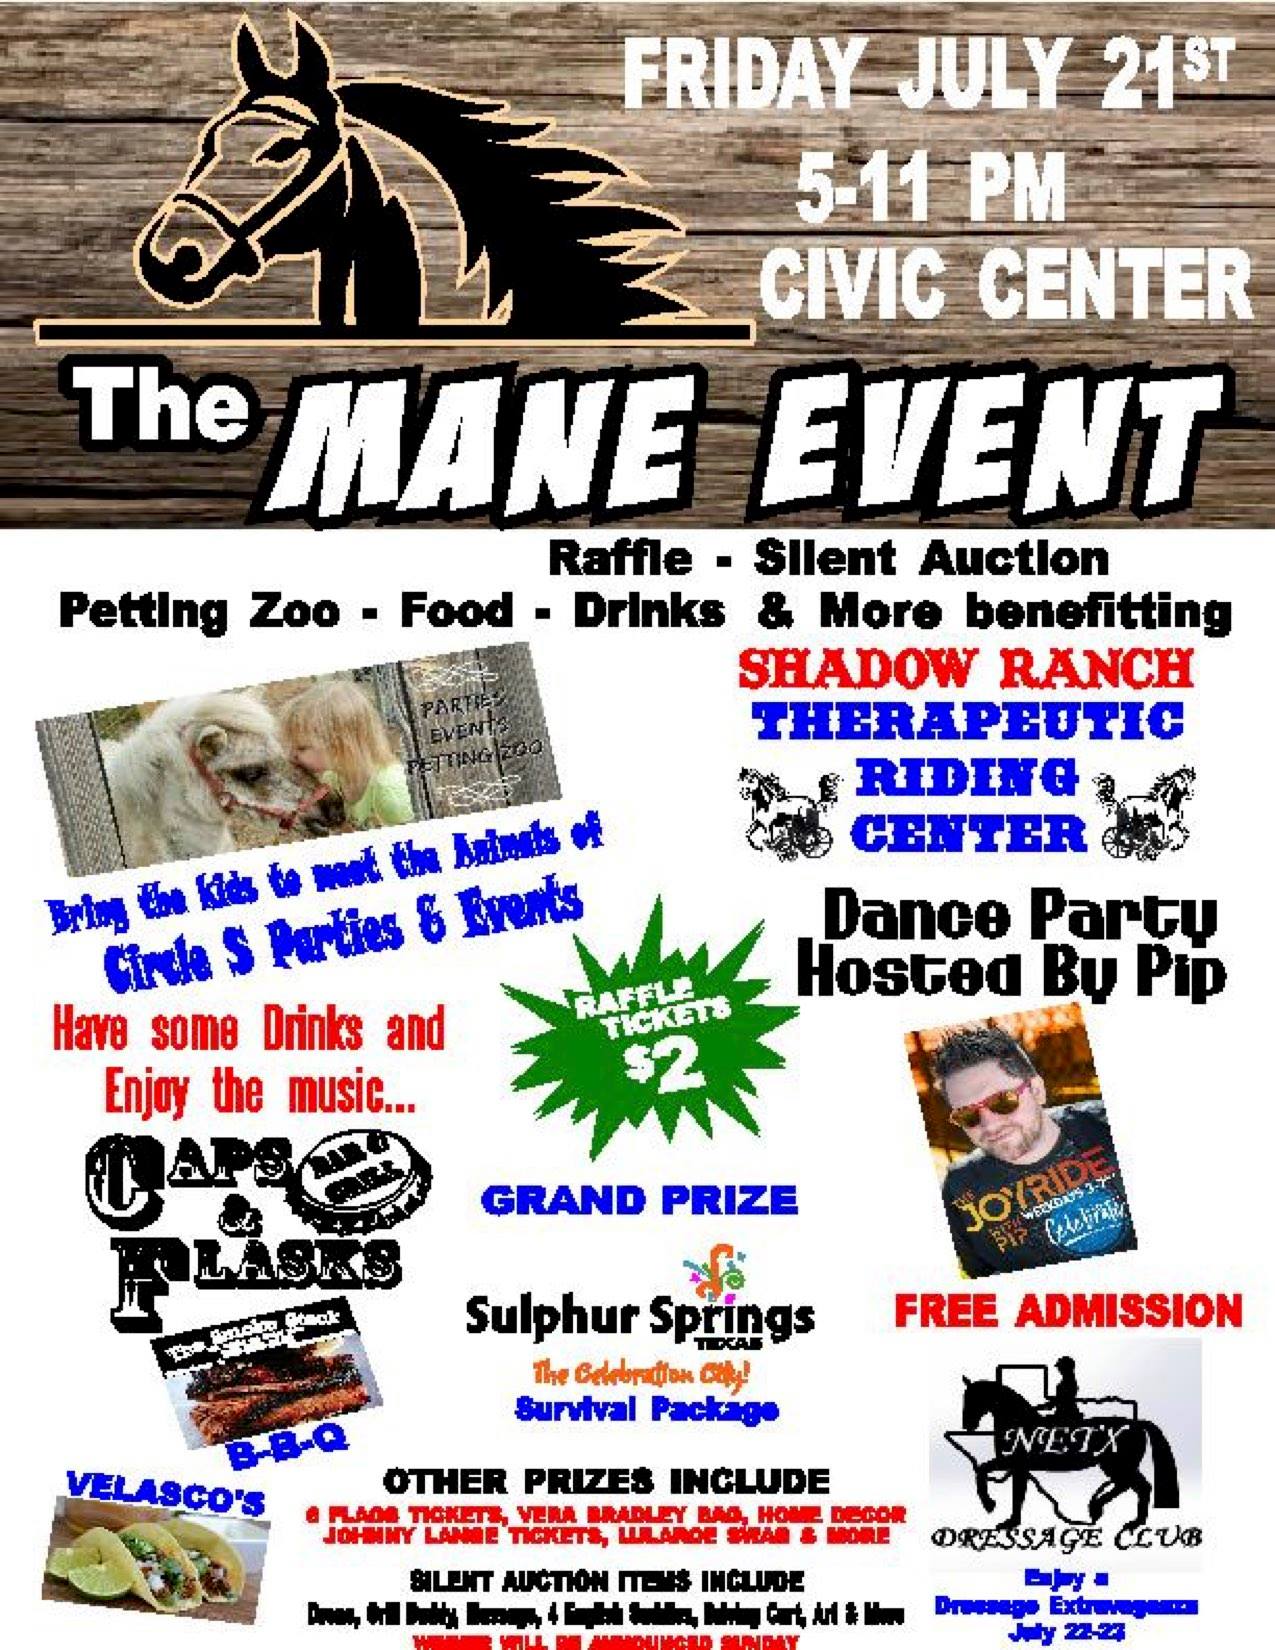 The Mane Event Benefitting Shadow Ranch Therapeutic Riding Center Coming Up on July 21st at Civic Center